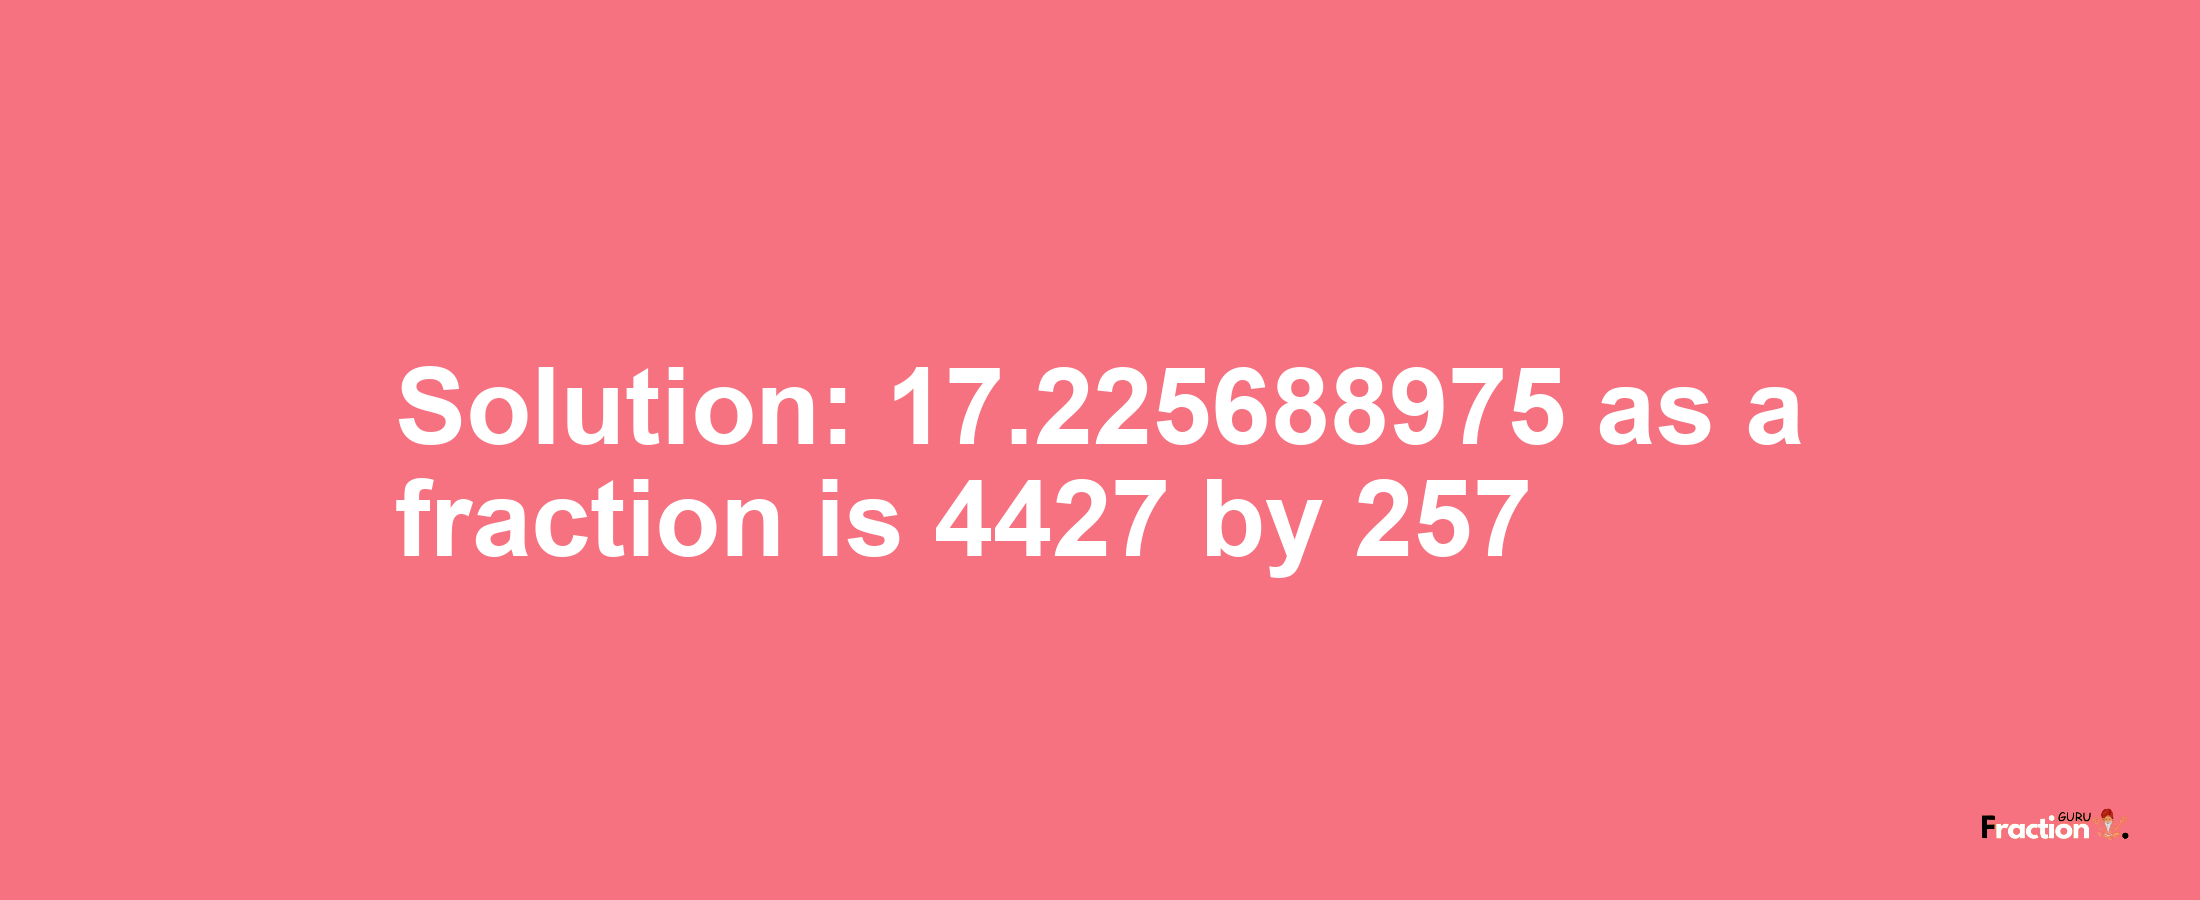 Solution:17.225688975 as a fraction is 4427/257